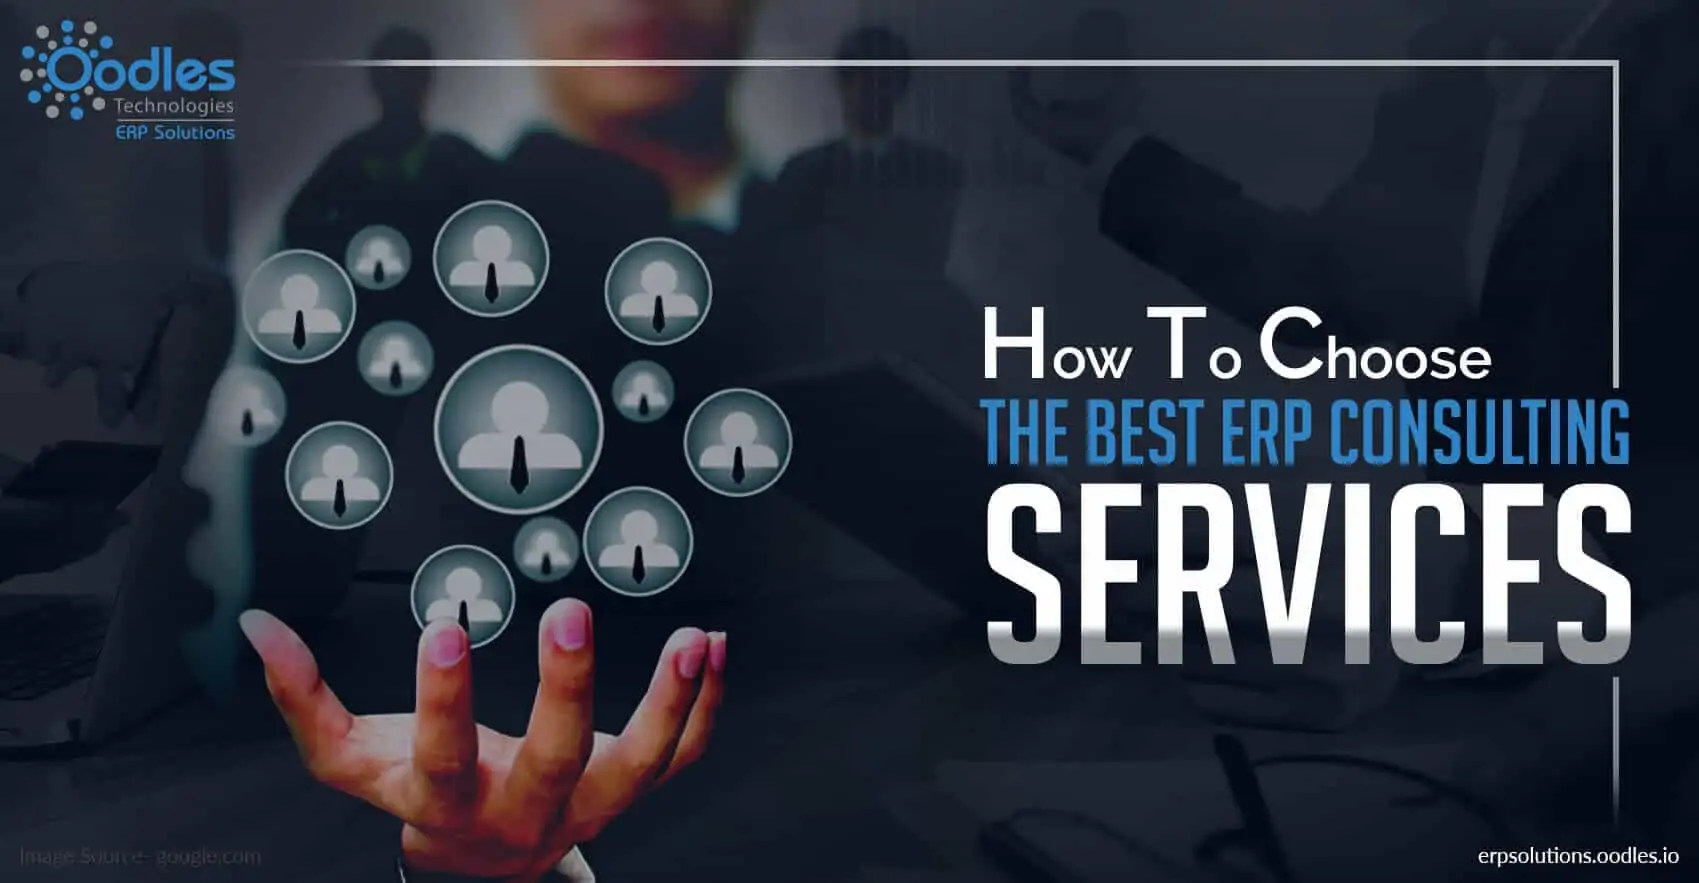 5 Tips To Hire The Best ERP Consulting Services Revealed!